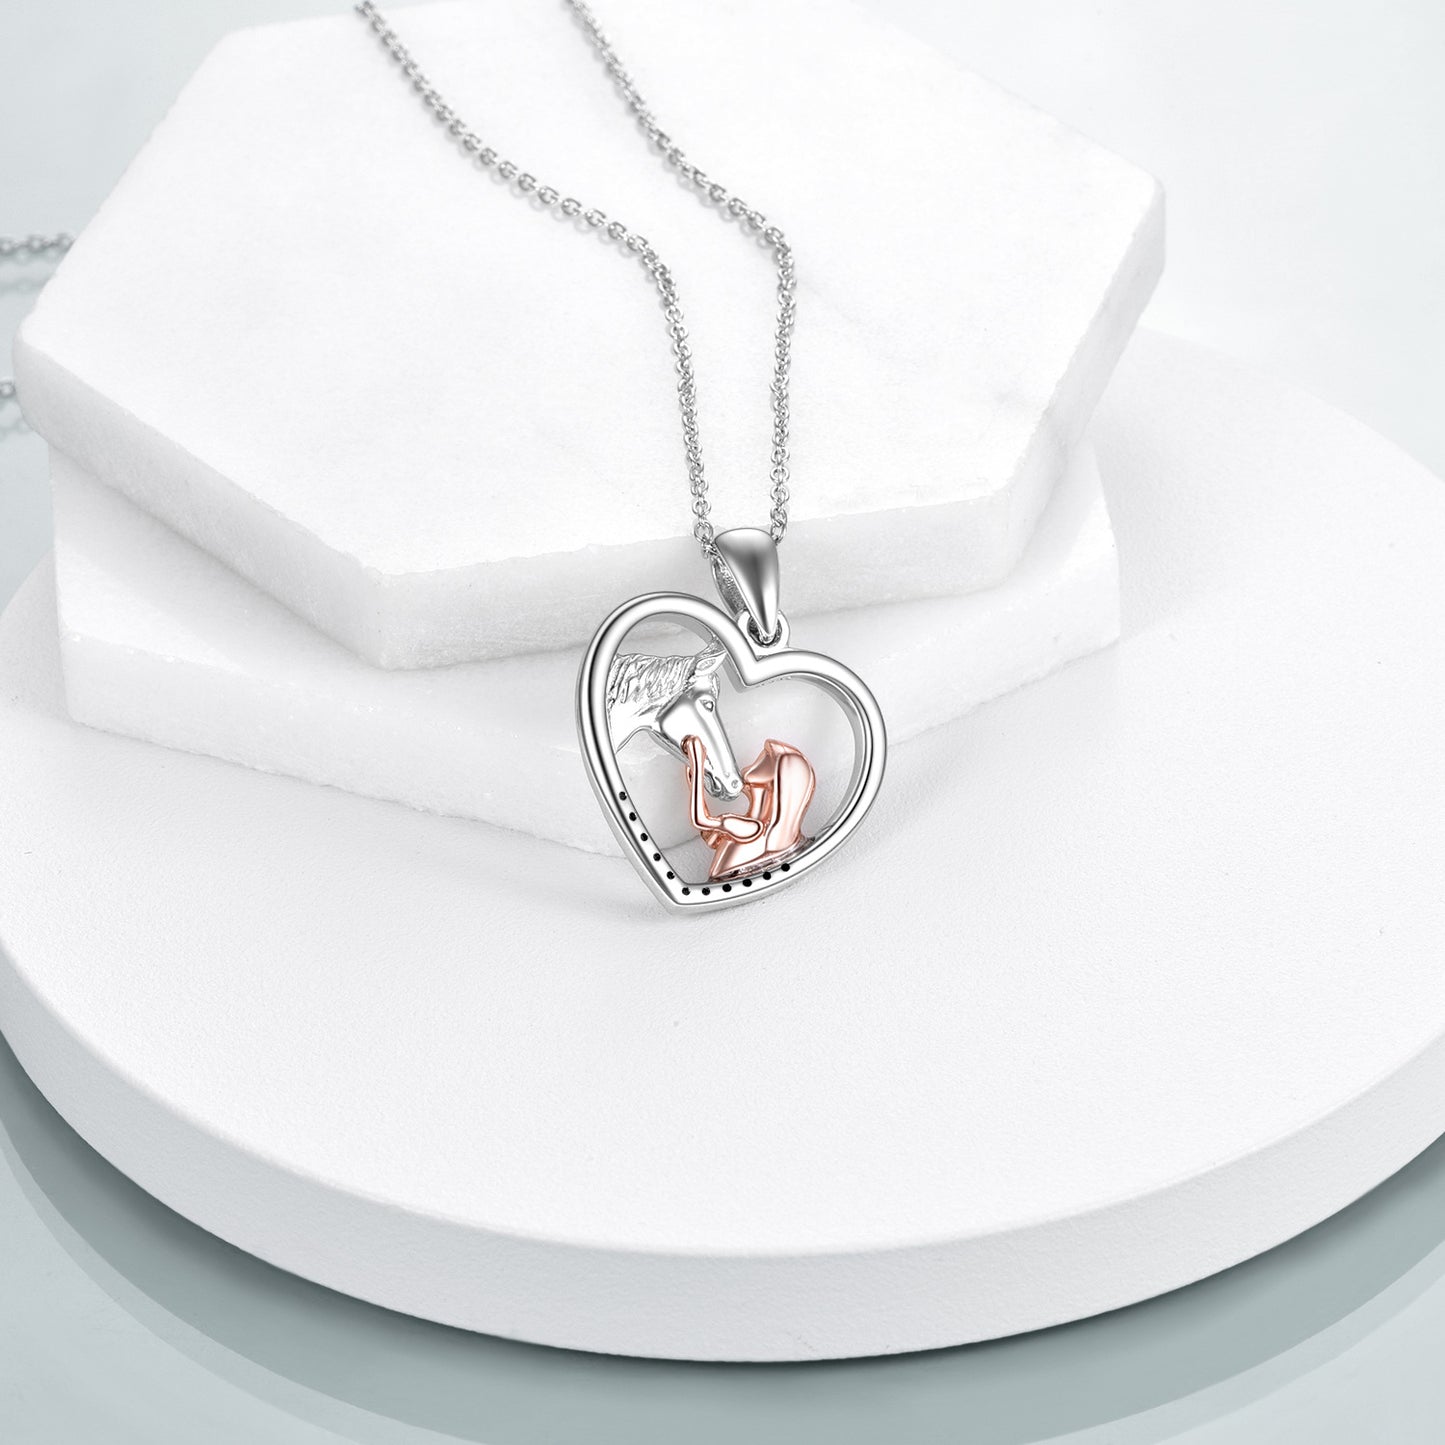 Girls and Horse Pendant Necklaces Sterling Silver- perfect Gift for Women Girls